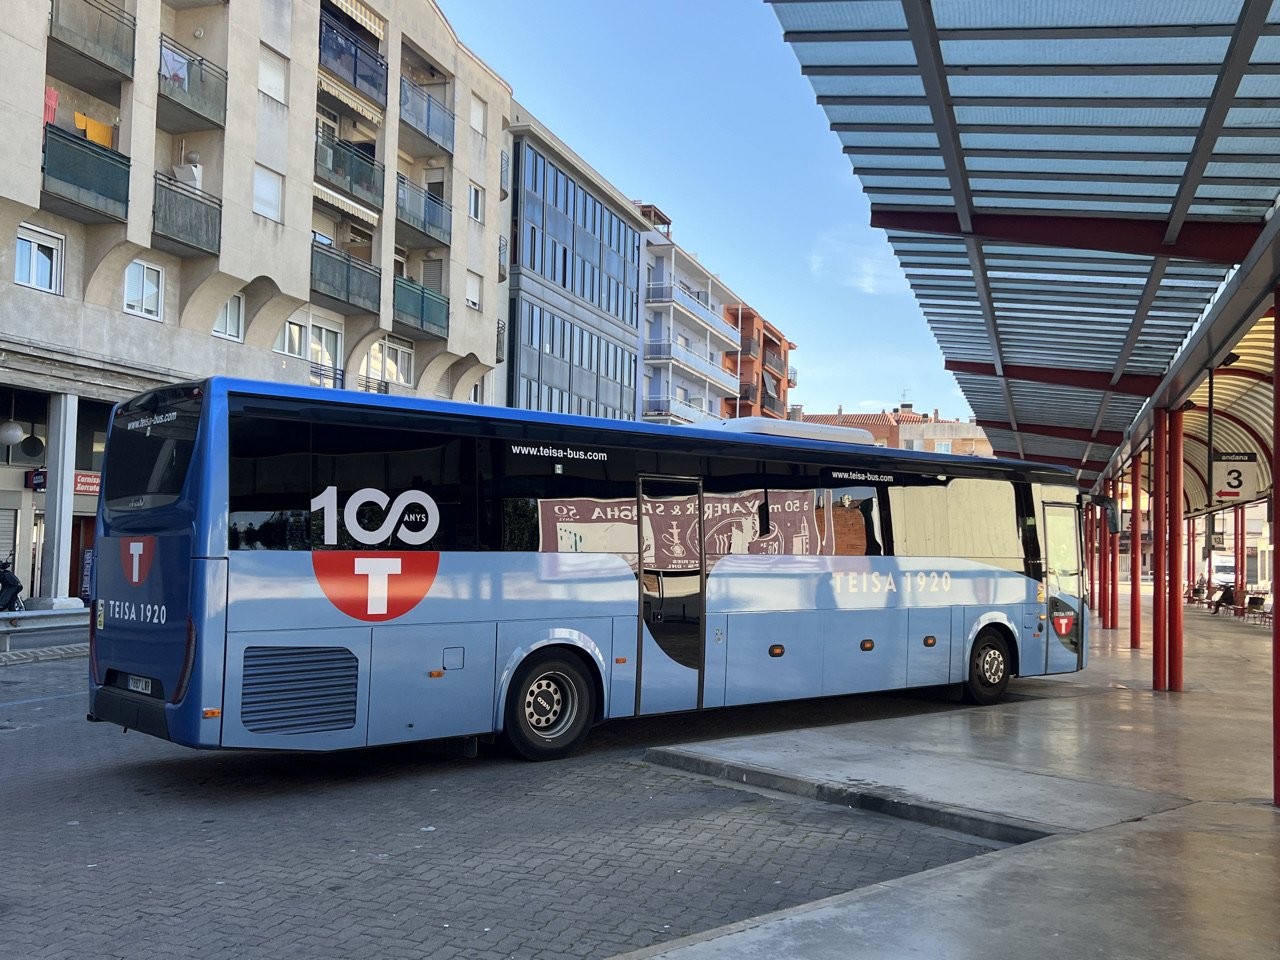 The Department of Territory of Catalonia reinforces bus lines in Costa Brava